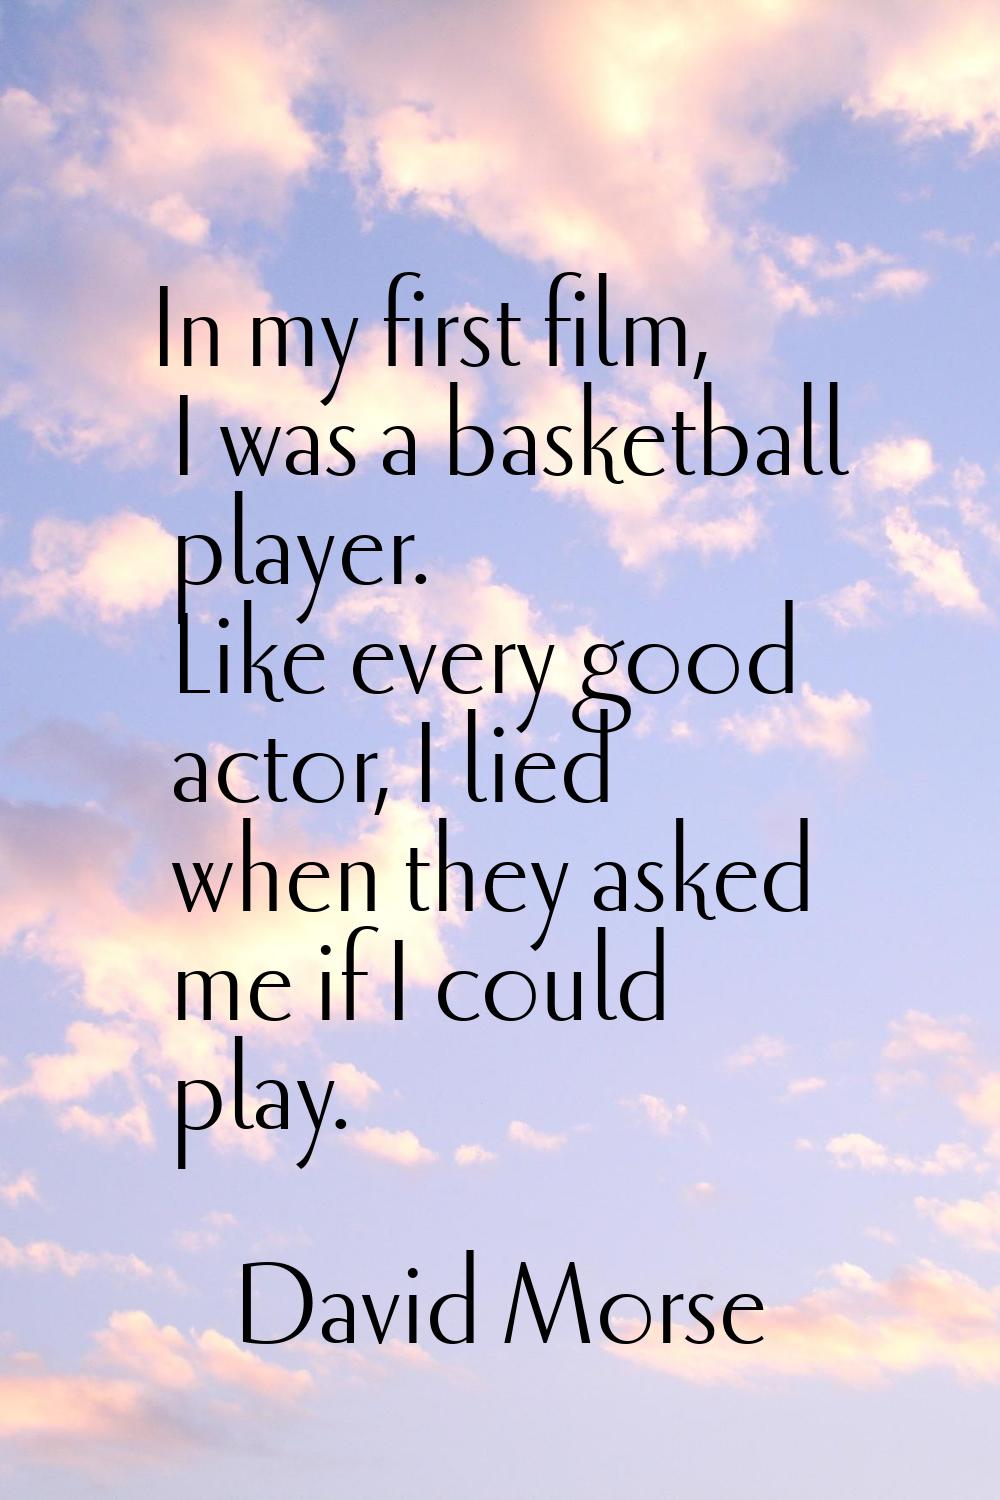 In my first film, I was a basketball player. Like every good actor, I lied when they asked me if I 